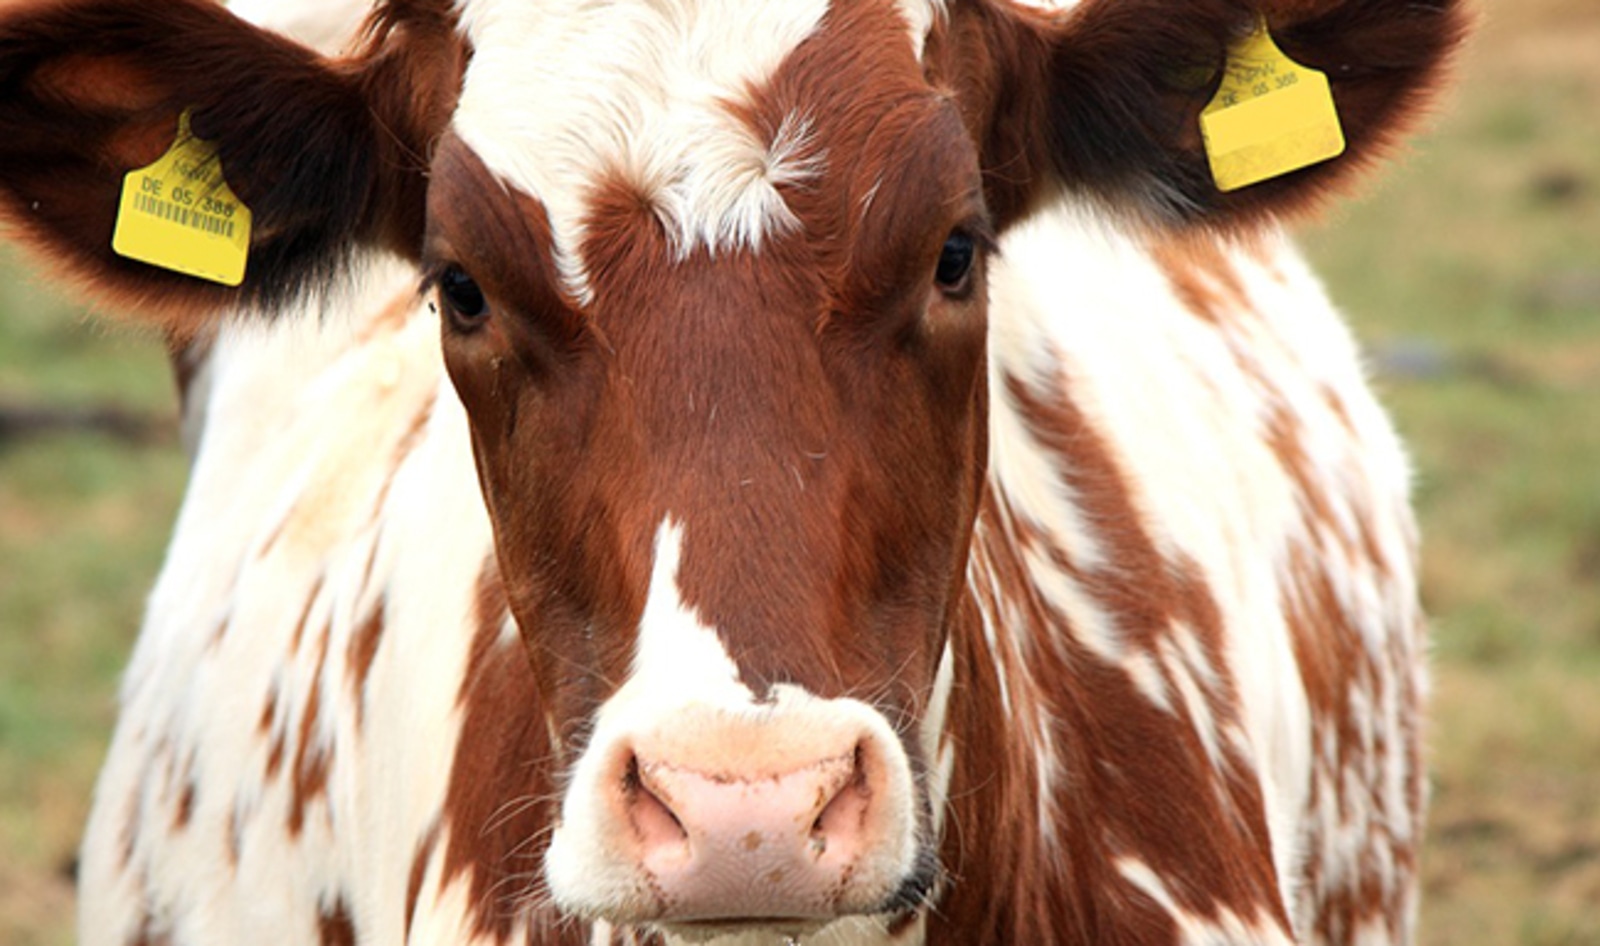 Food Advocacy Group Launches $3 Million Grant to Wipe Out Animal Agriculture